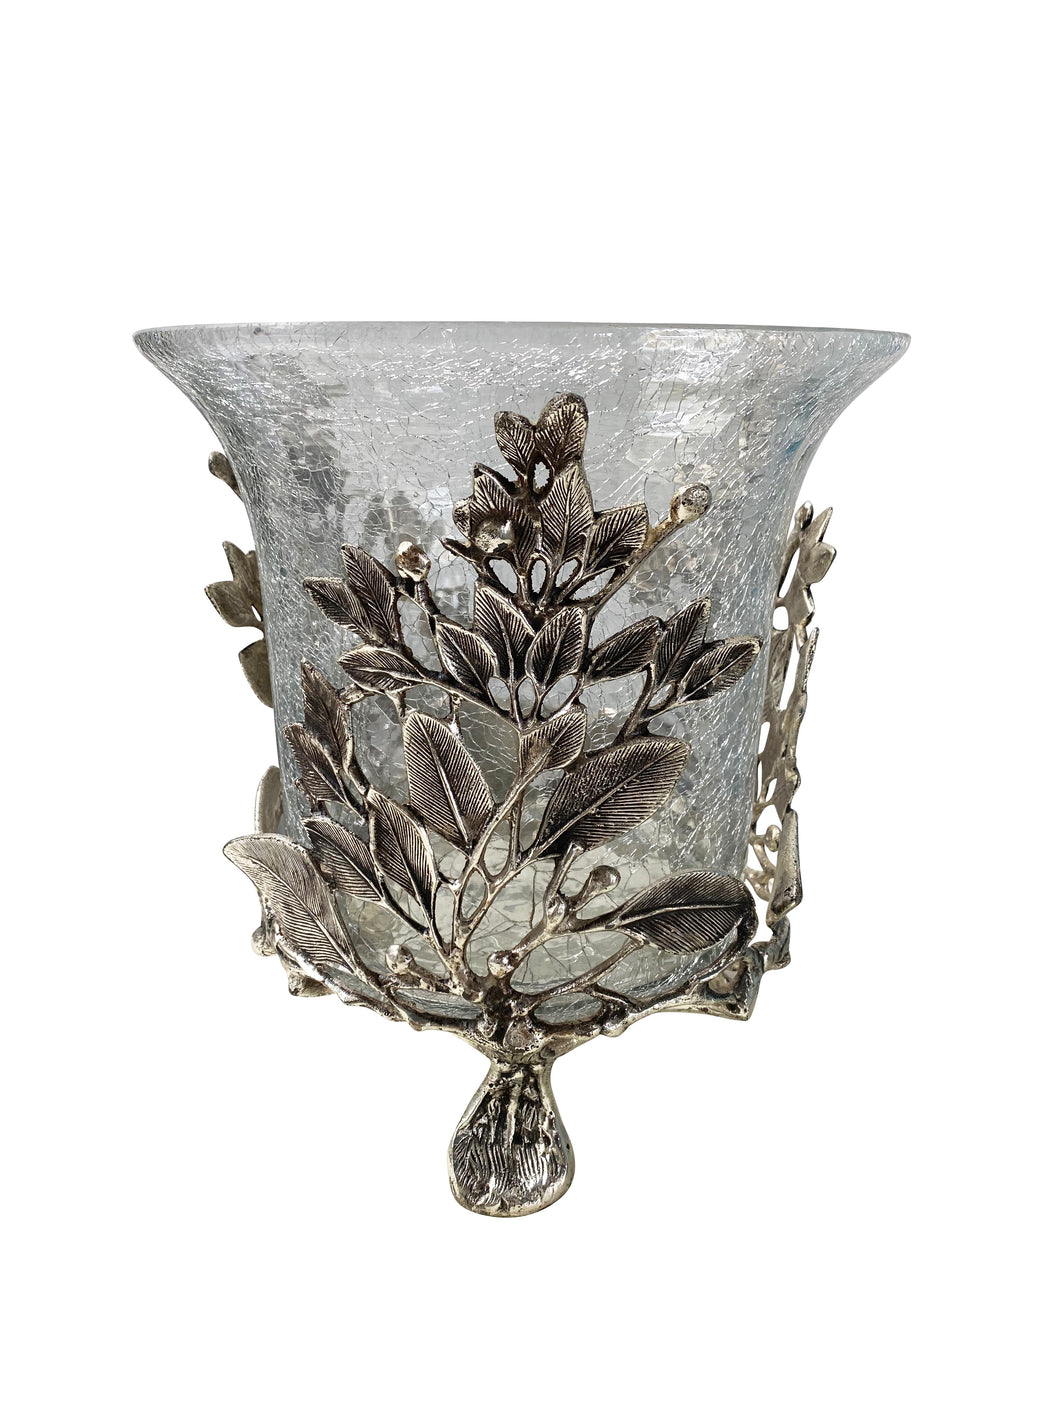 Footed Silver and Glass Vase